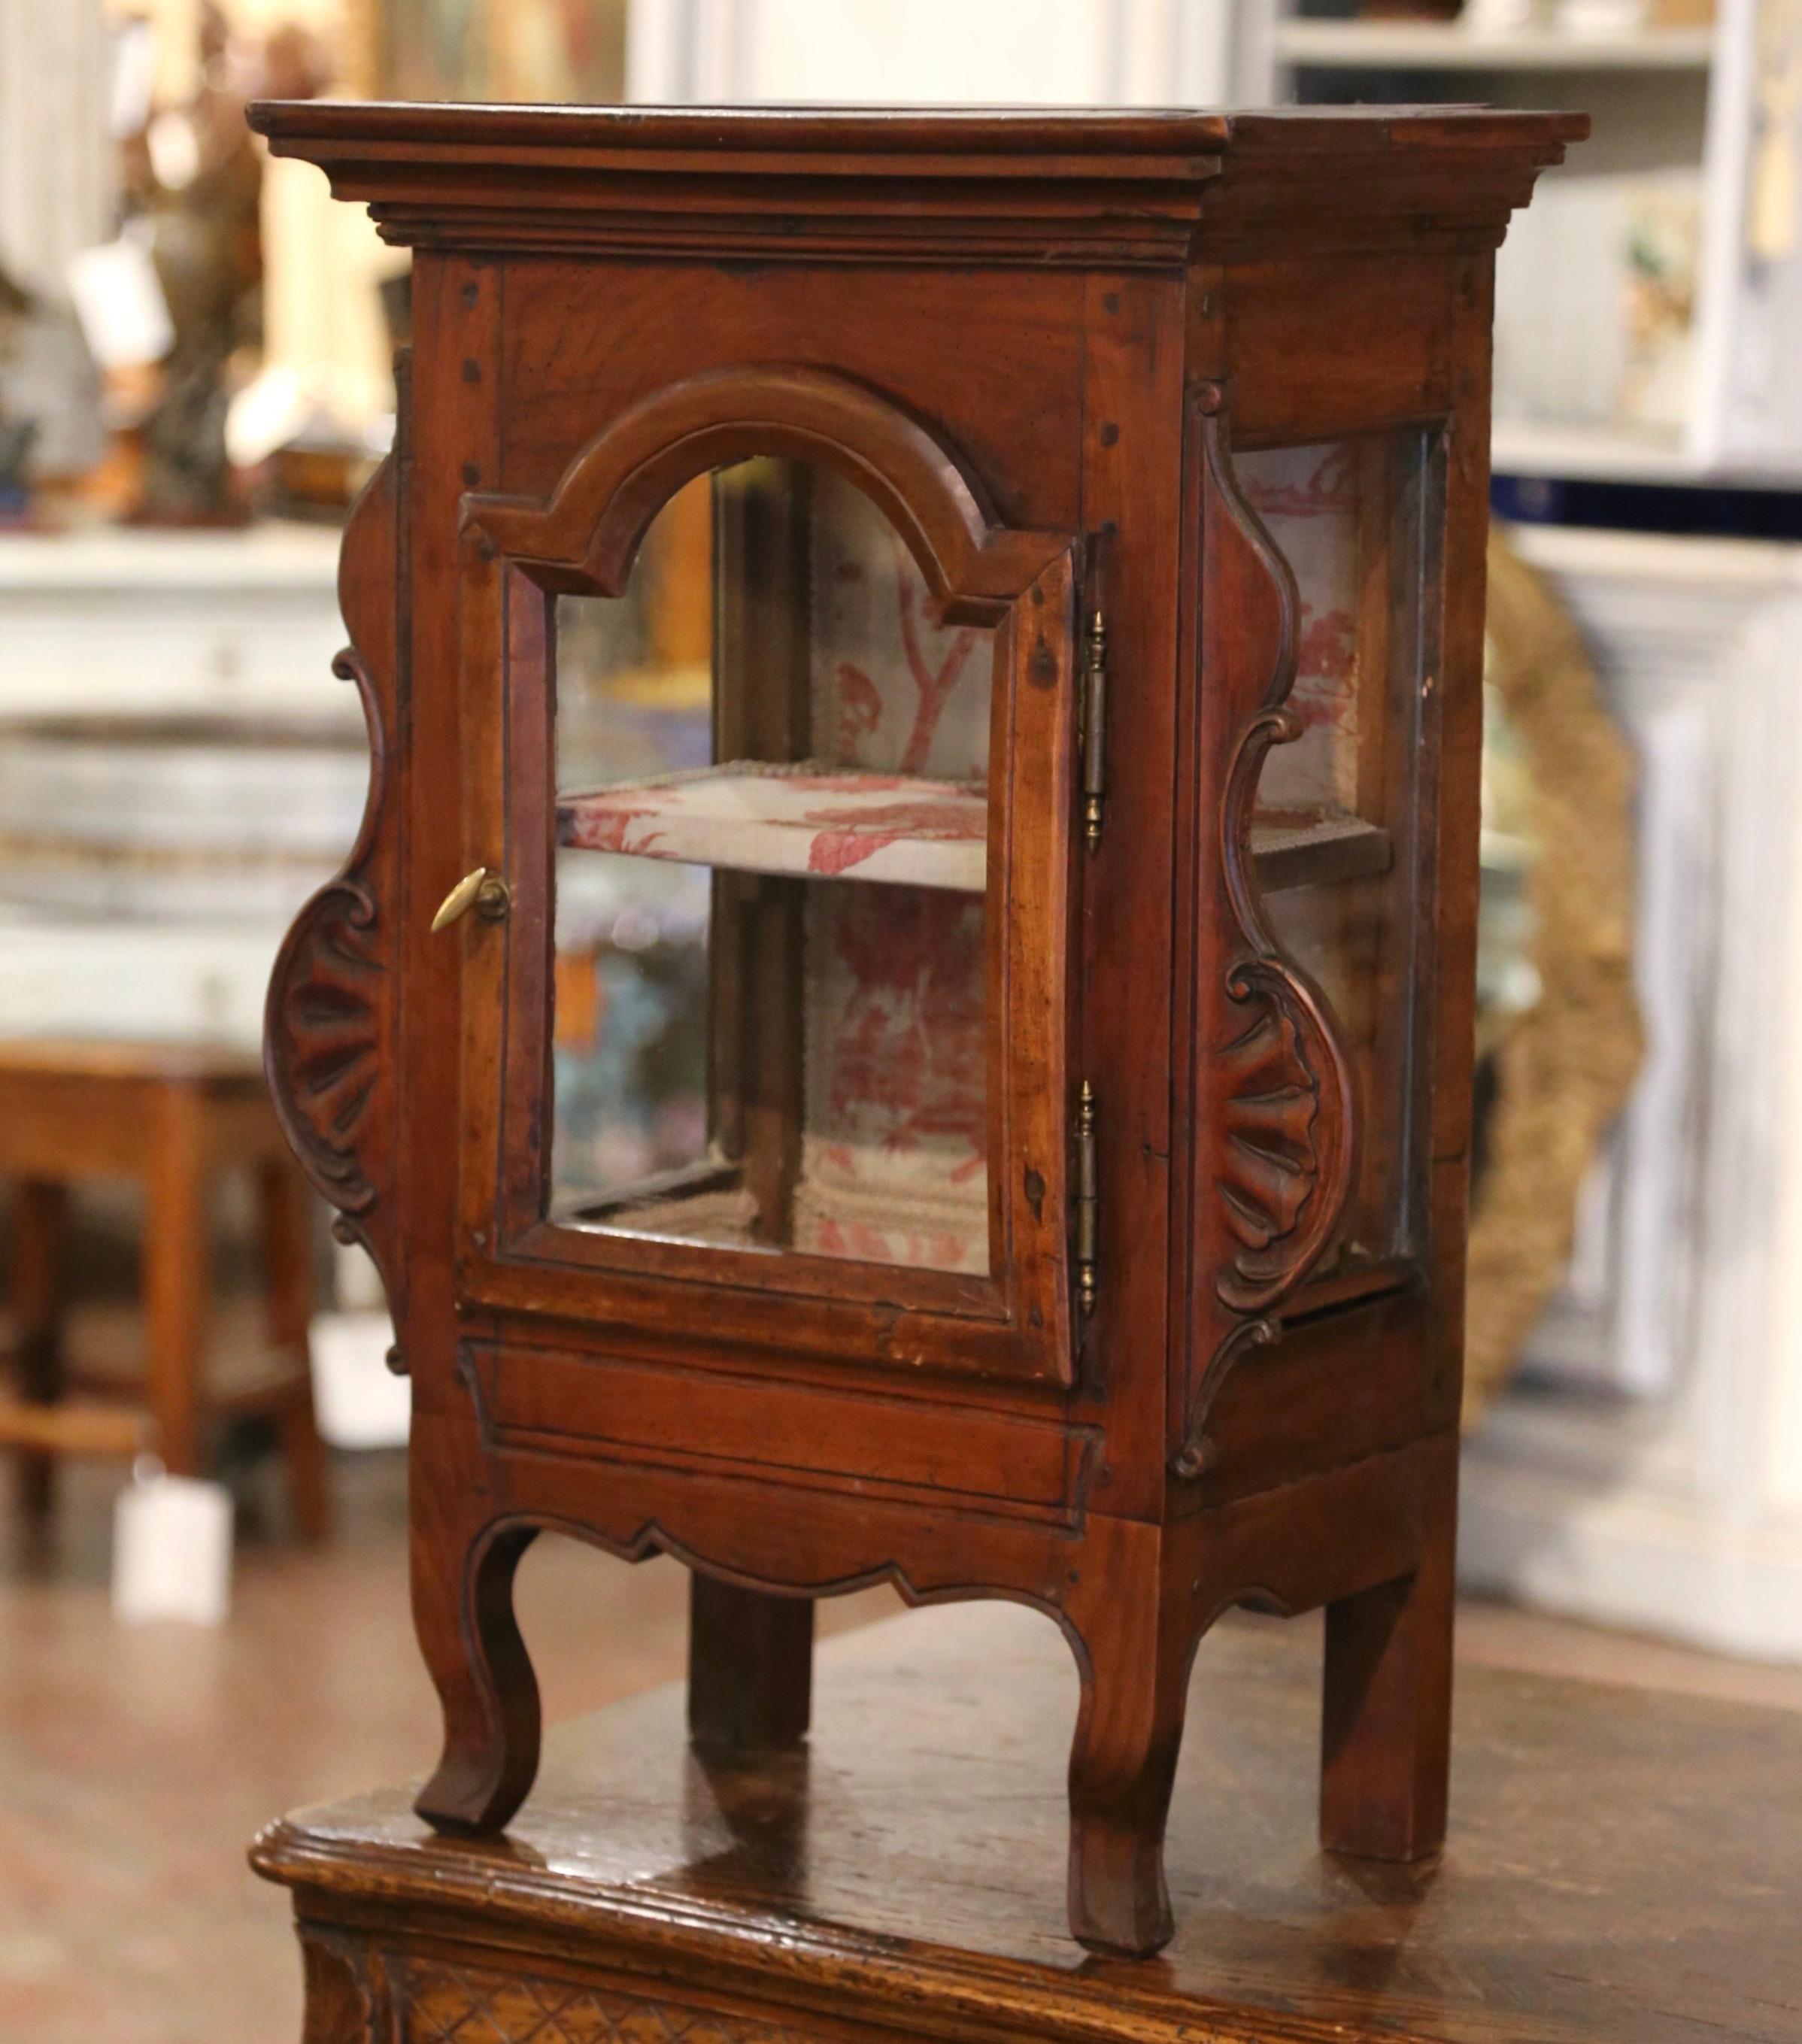 This elegant and petite antique vitrine was crafted in France, circa 1780. The hanging cabinet features front curved legs over a scalloped apron, and both sides are embellished with carved acanthus leaf motifs. The cabinet door with arched decor is